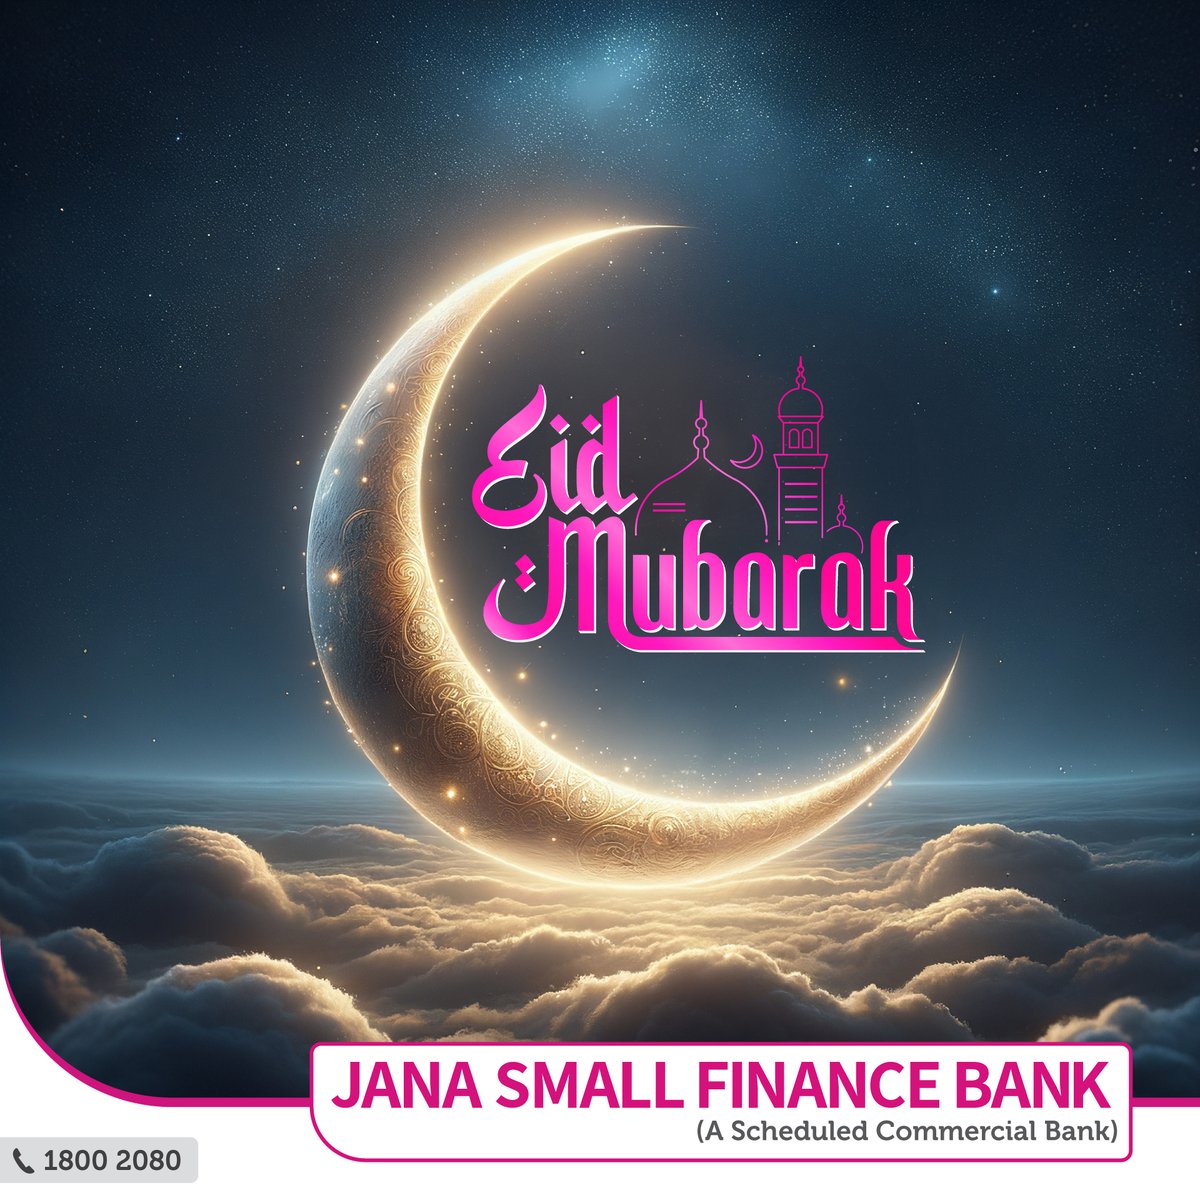 Wishing you and your loved ones a joyous Eid filled with blessings, peace, and prosperity. Eid Mubarak! #eid #janabank